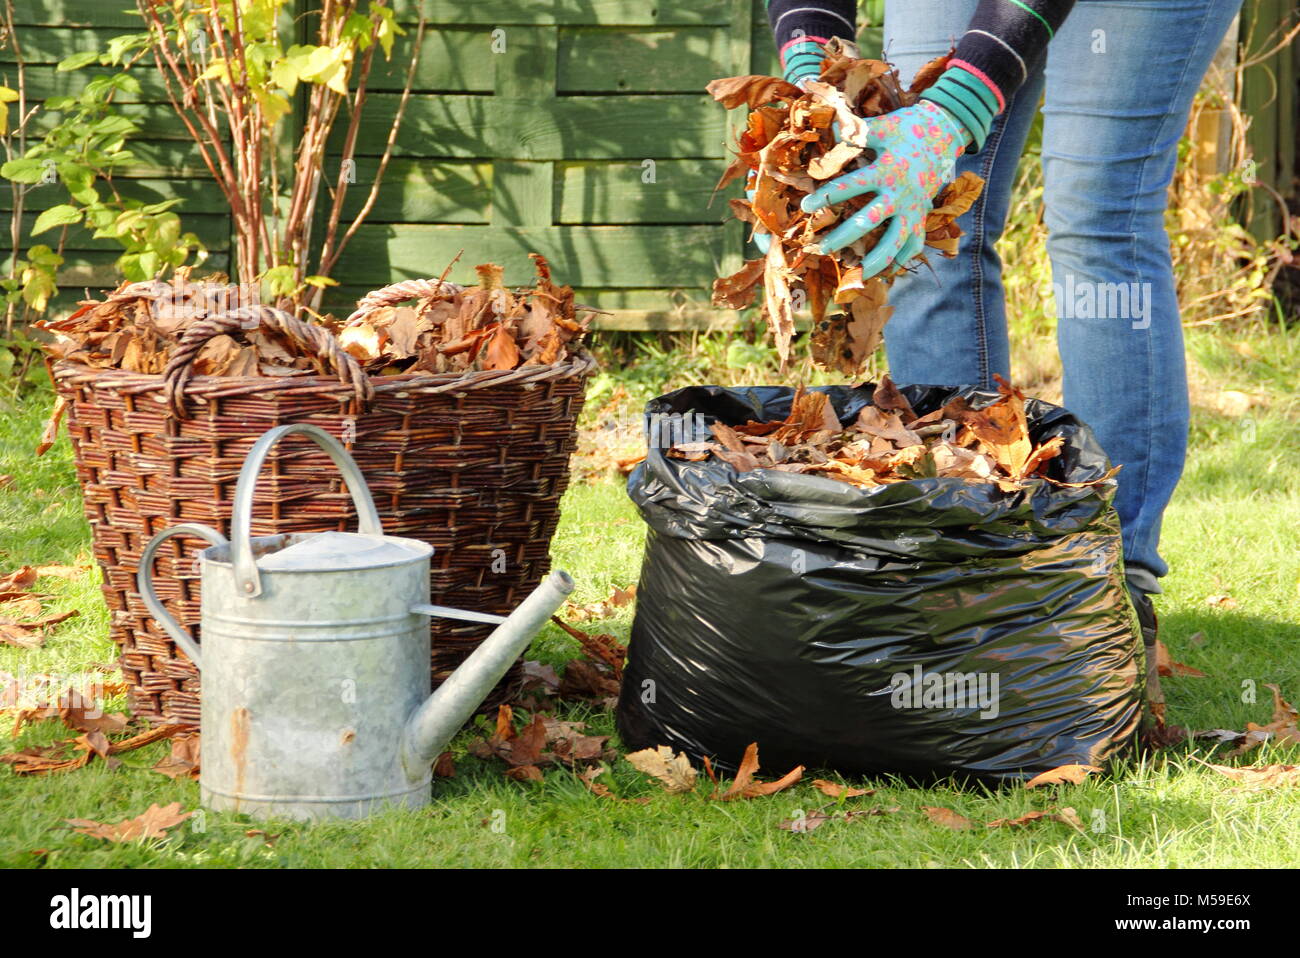 Making leaf mould step by step:1. Fallen autumn leaves are gathered into black plastic bin bags for rotting down to make leaf mould by female gardener Stock Photo